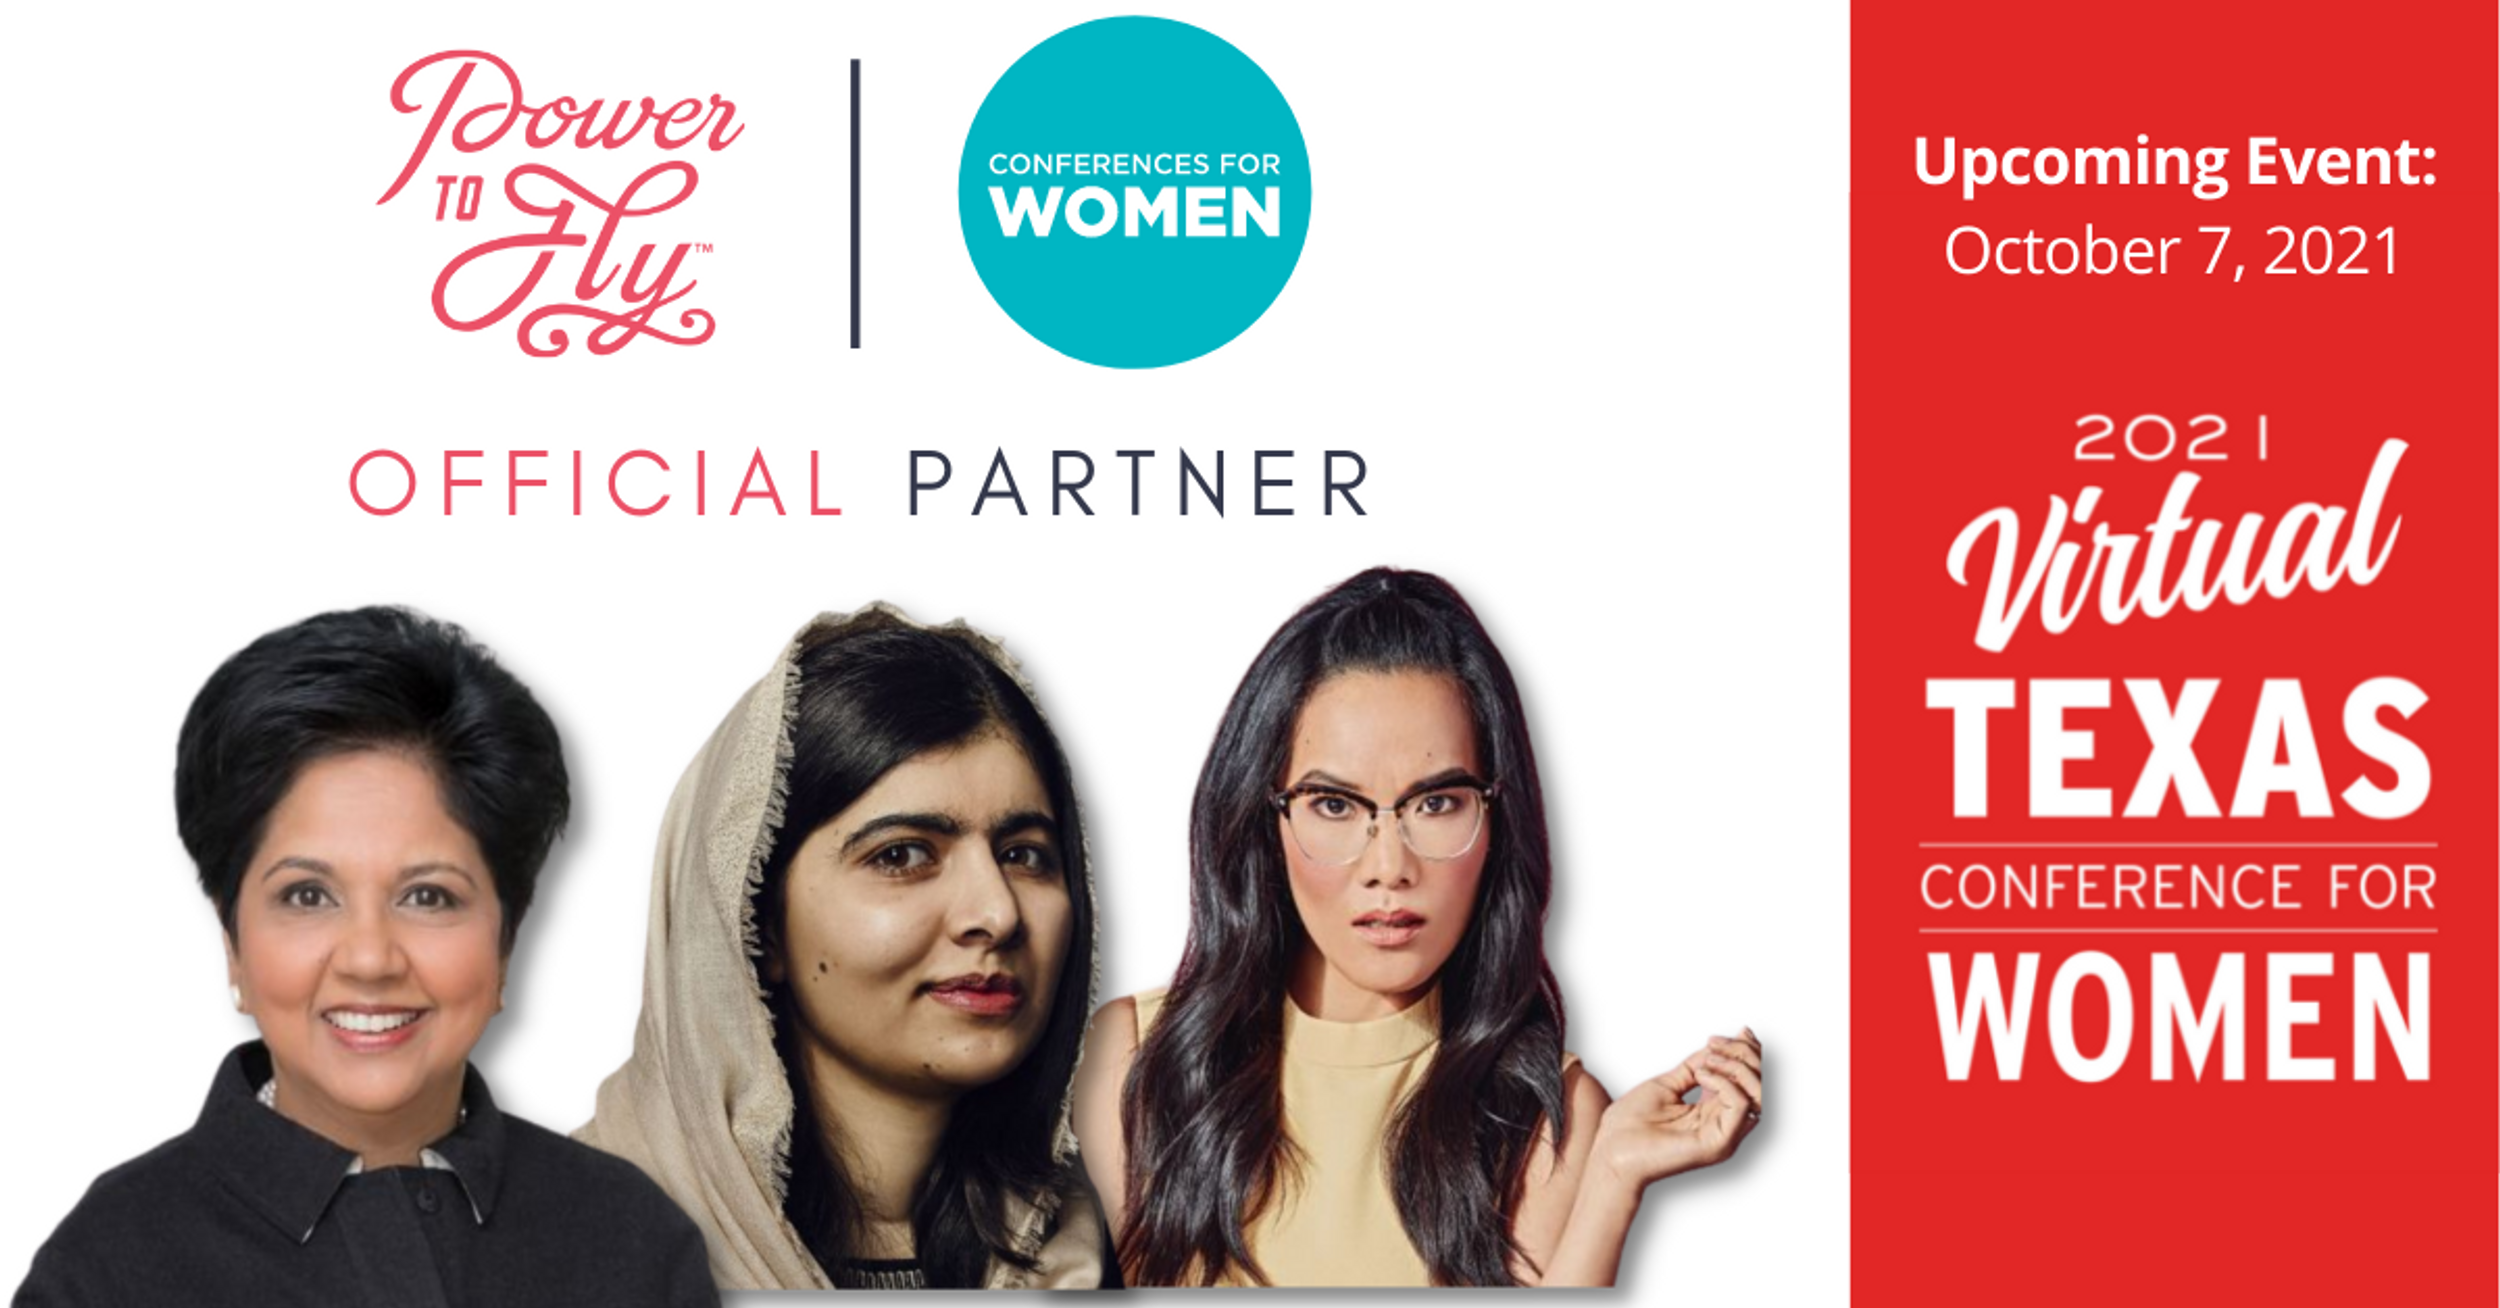 Introducing Our Newest Partner: The Conferences for Women